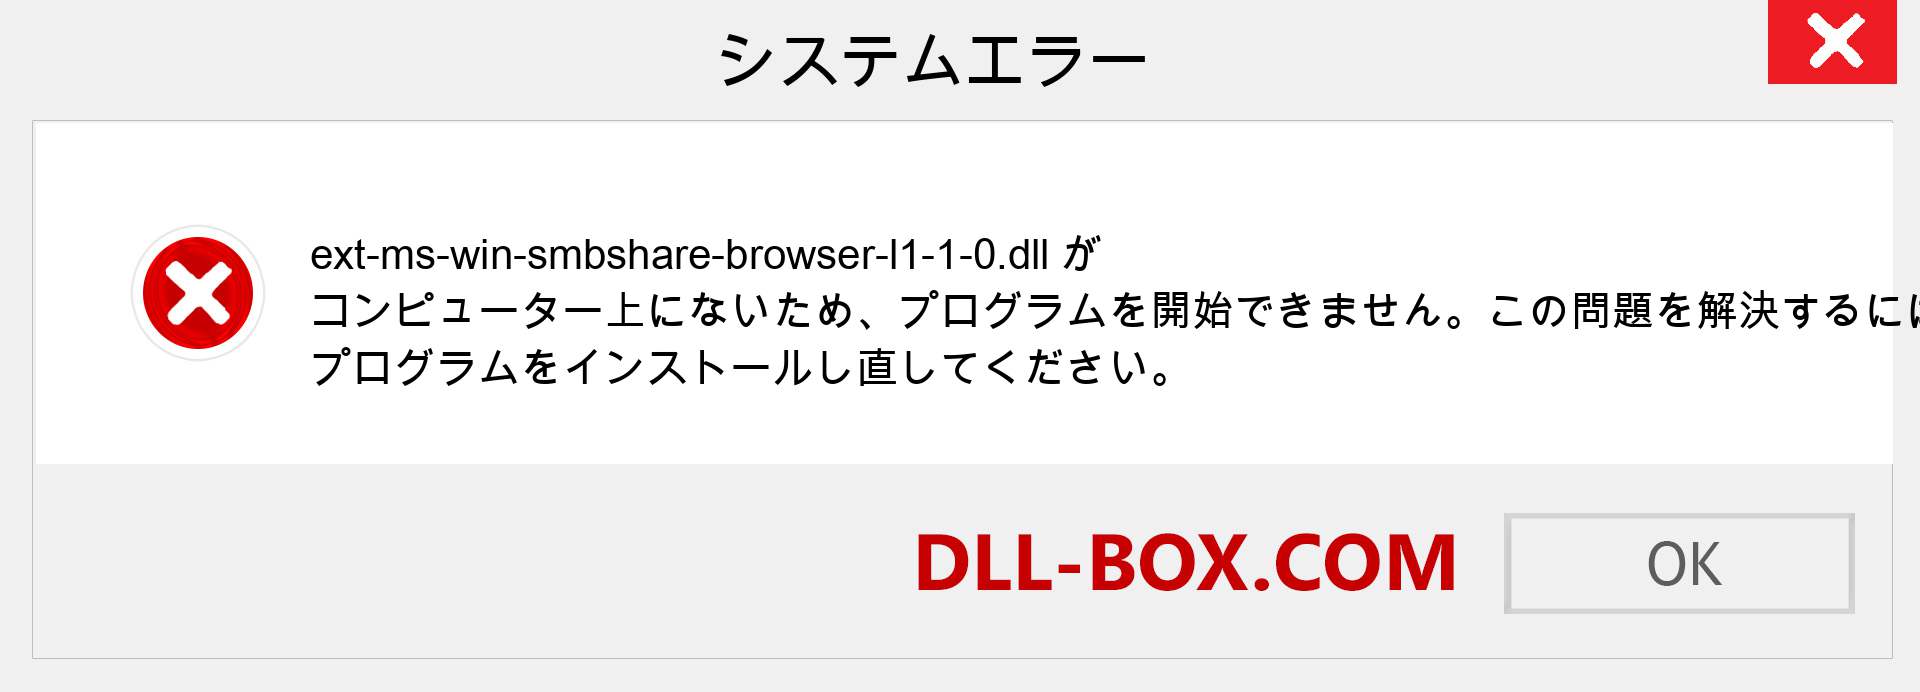 ext-ms-win-smbshare-browser-l1-1-0.dllファイルがありませんか？ Windows 7、8、10用にダウンロード-Windows、写真、画像でext-ms-win-smbshare-browser-l1-1-0dllの欠落エラーを修正